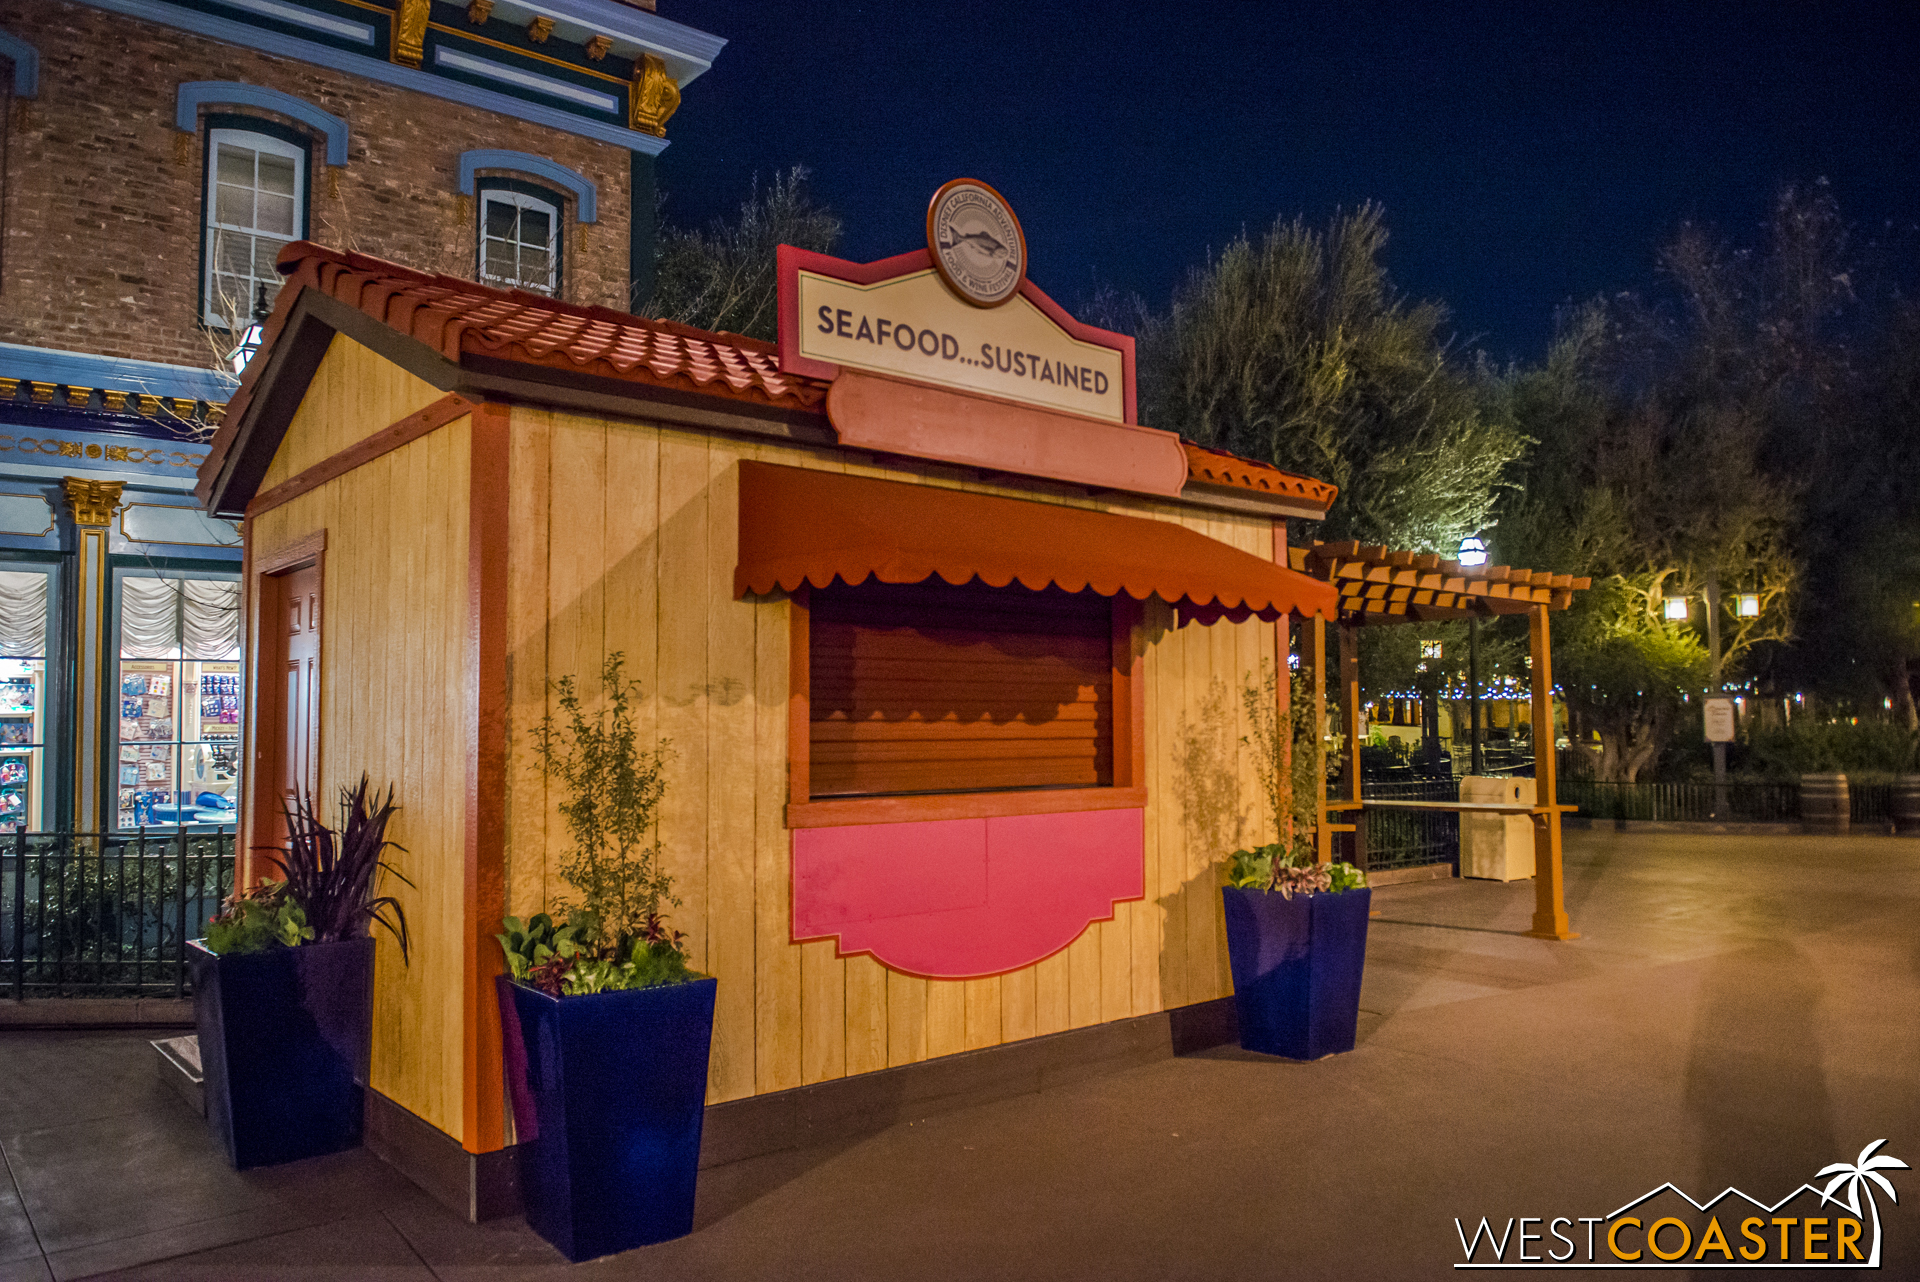  The little food carts have already started appearing all along the Pacific Wharf and Paradise Pier corridor through which the parade route normally runs. 